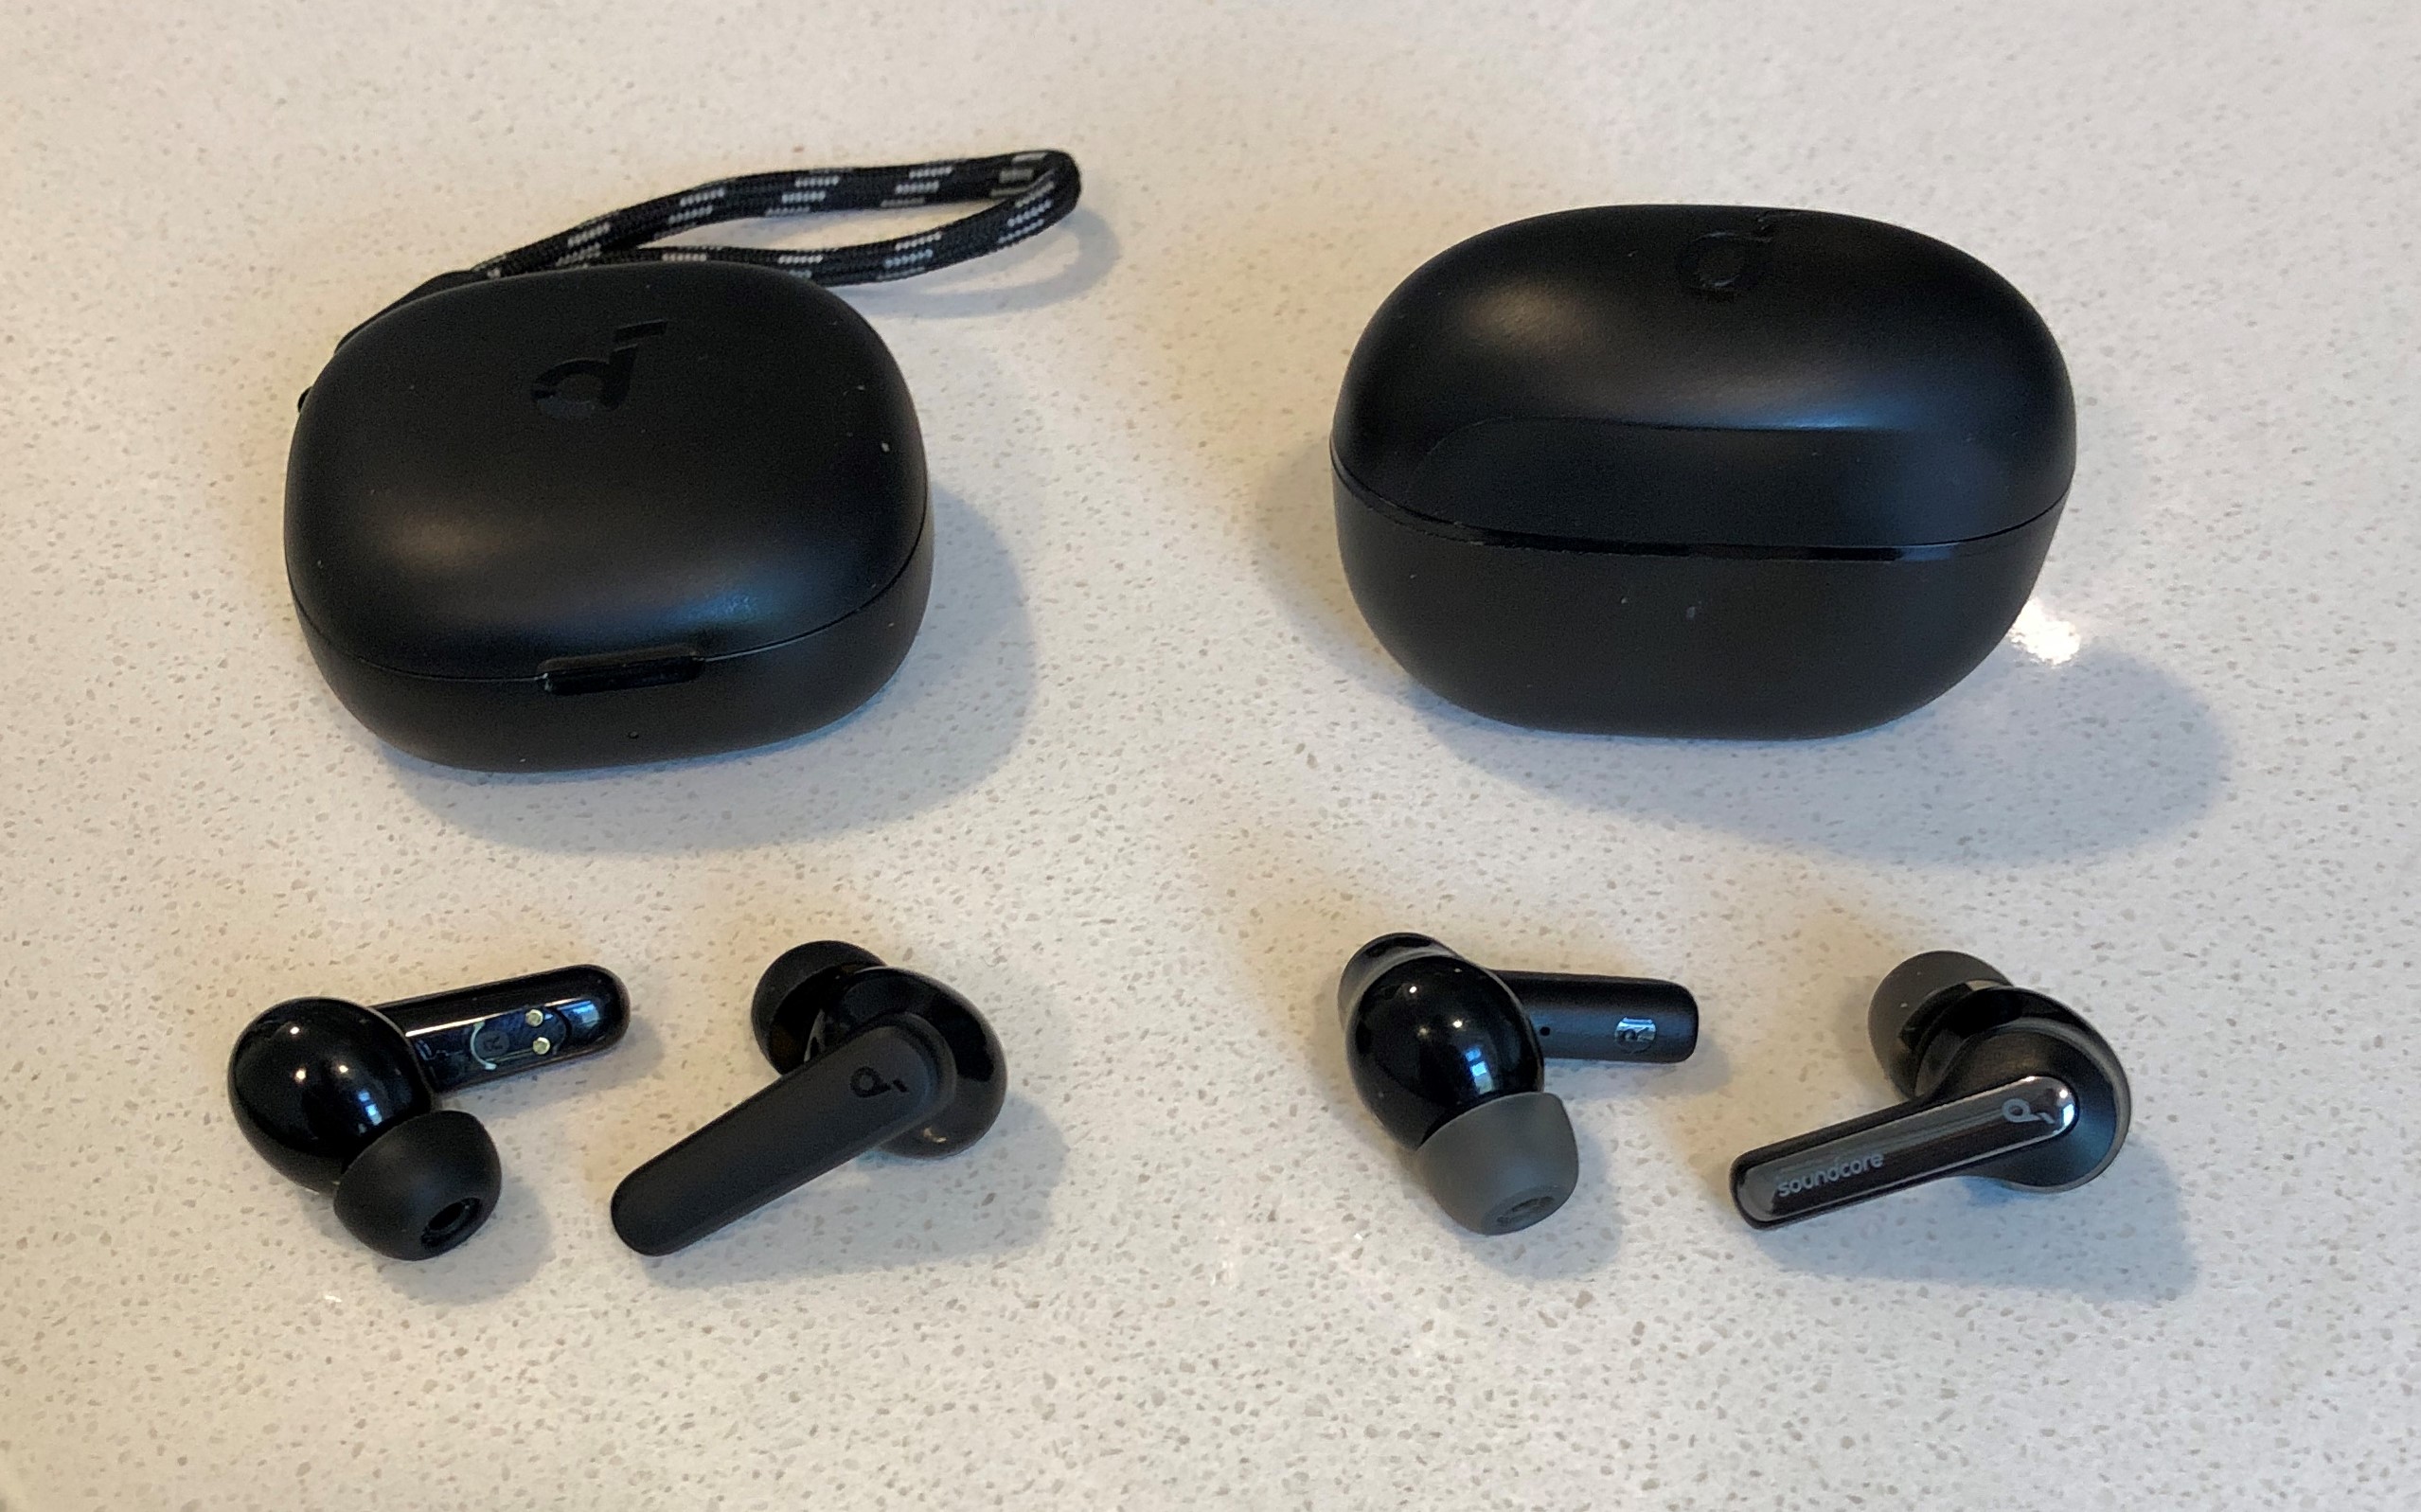 Soundcore P20i vs Life P3i charging case and wireless earbuds